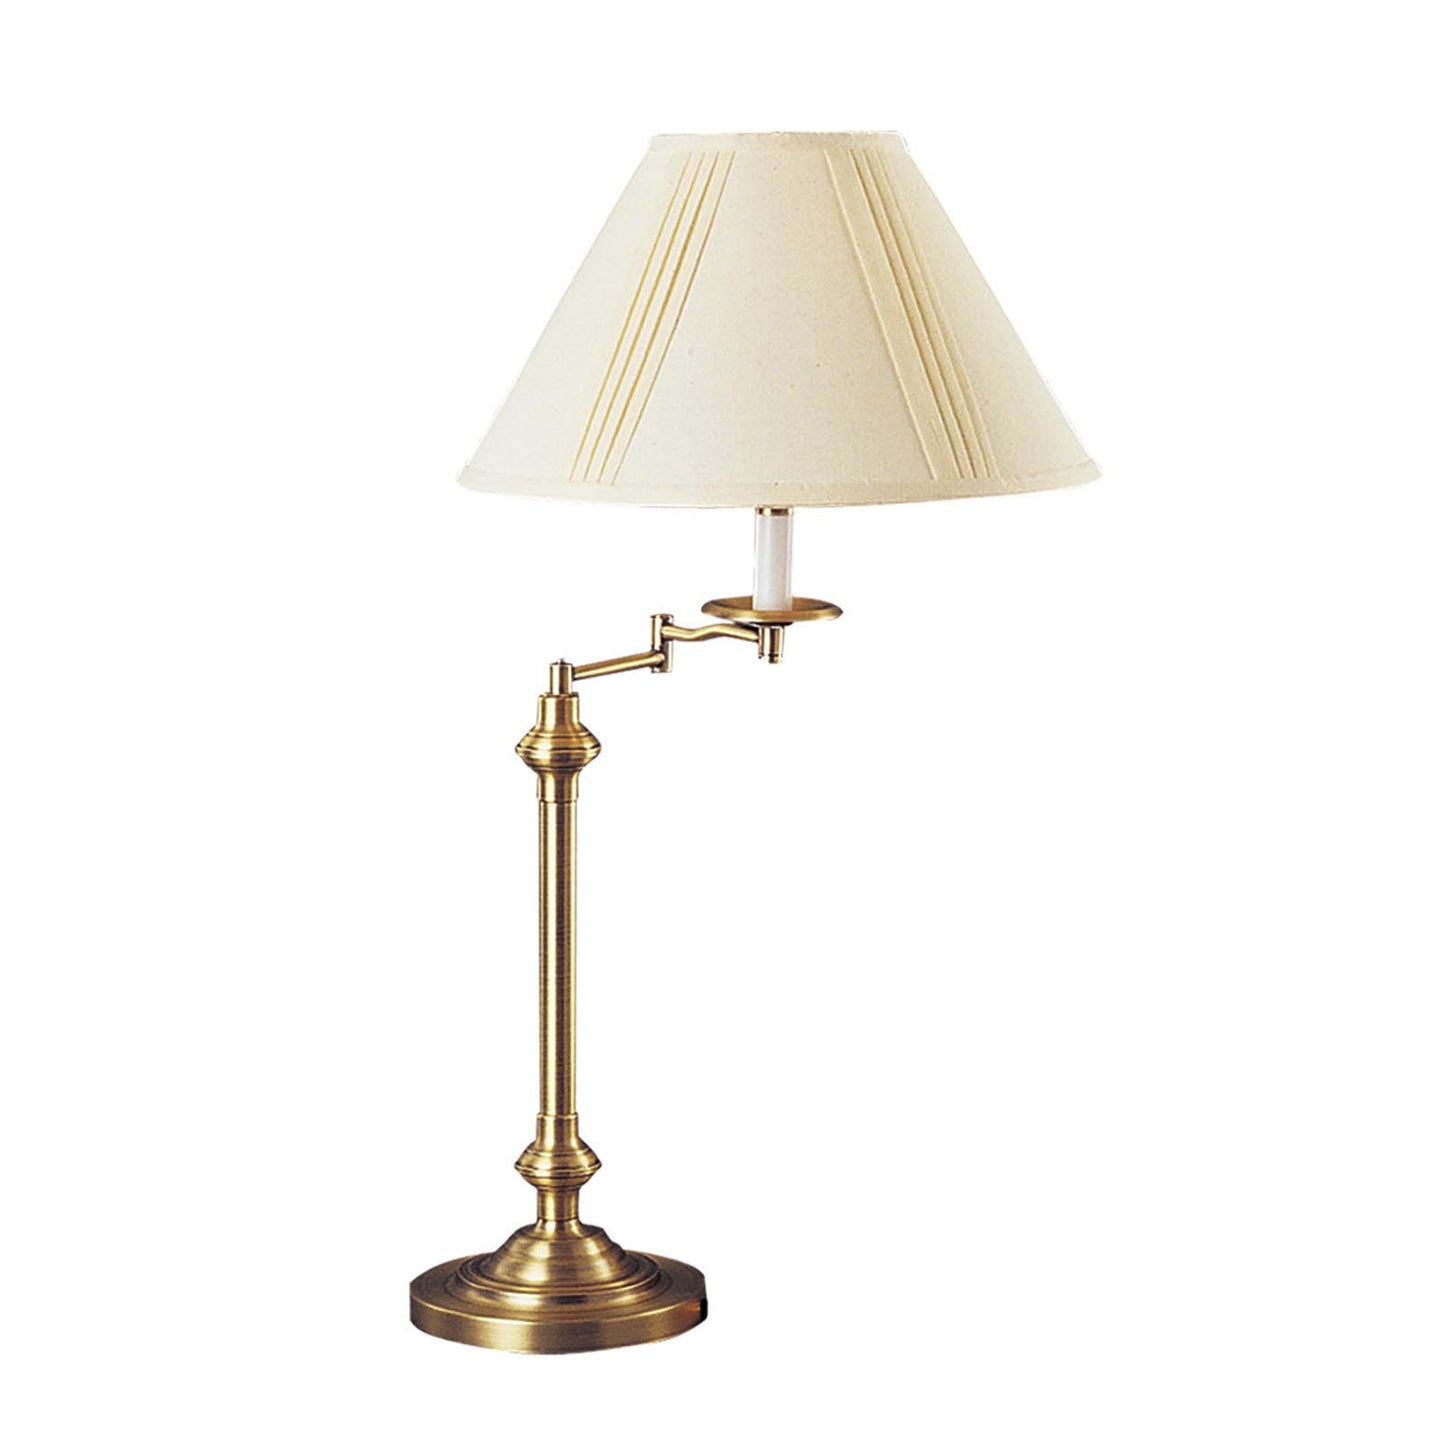 30" Bronze Metal Table Lamp With Off White Empire Shade